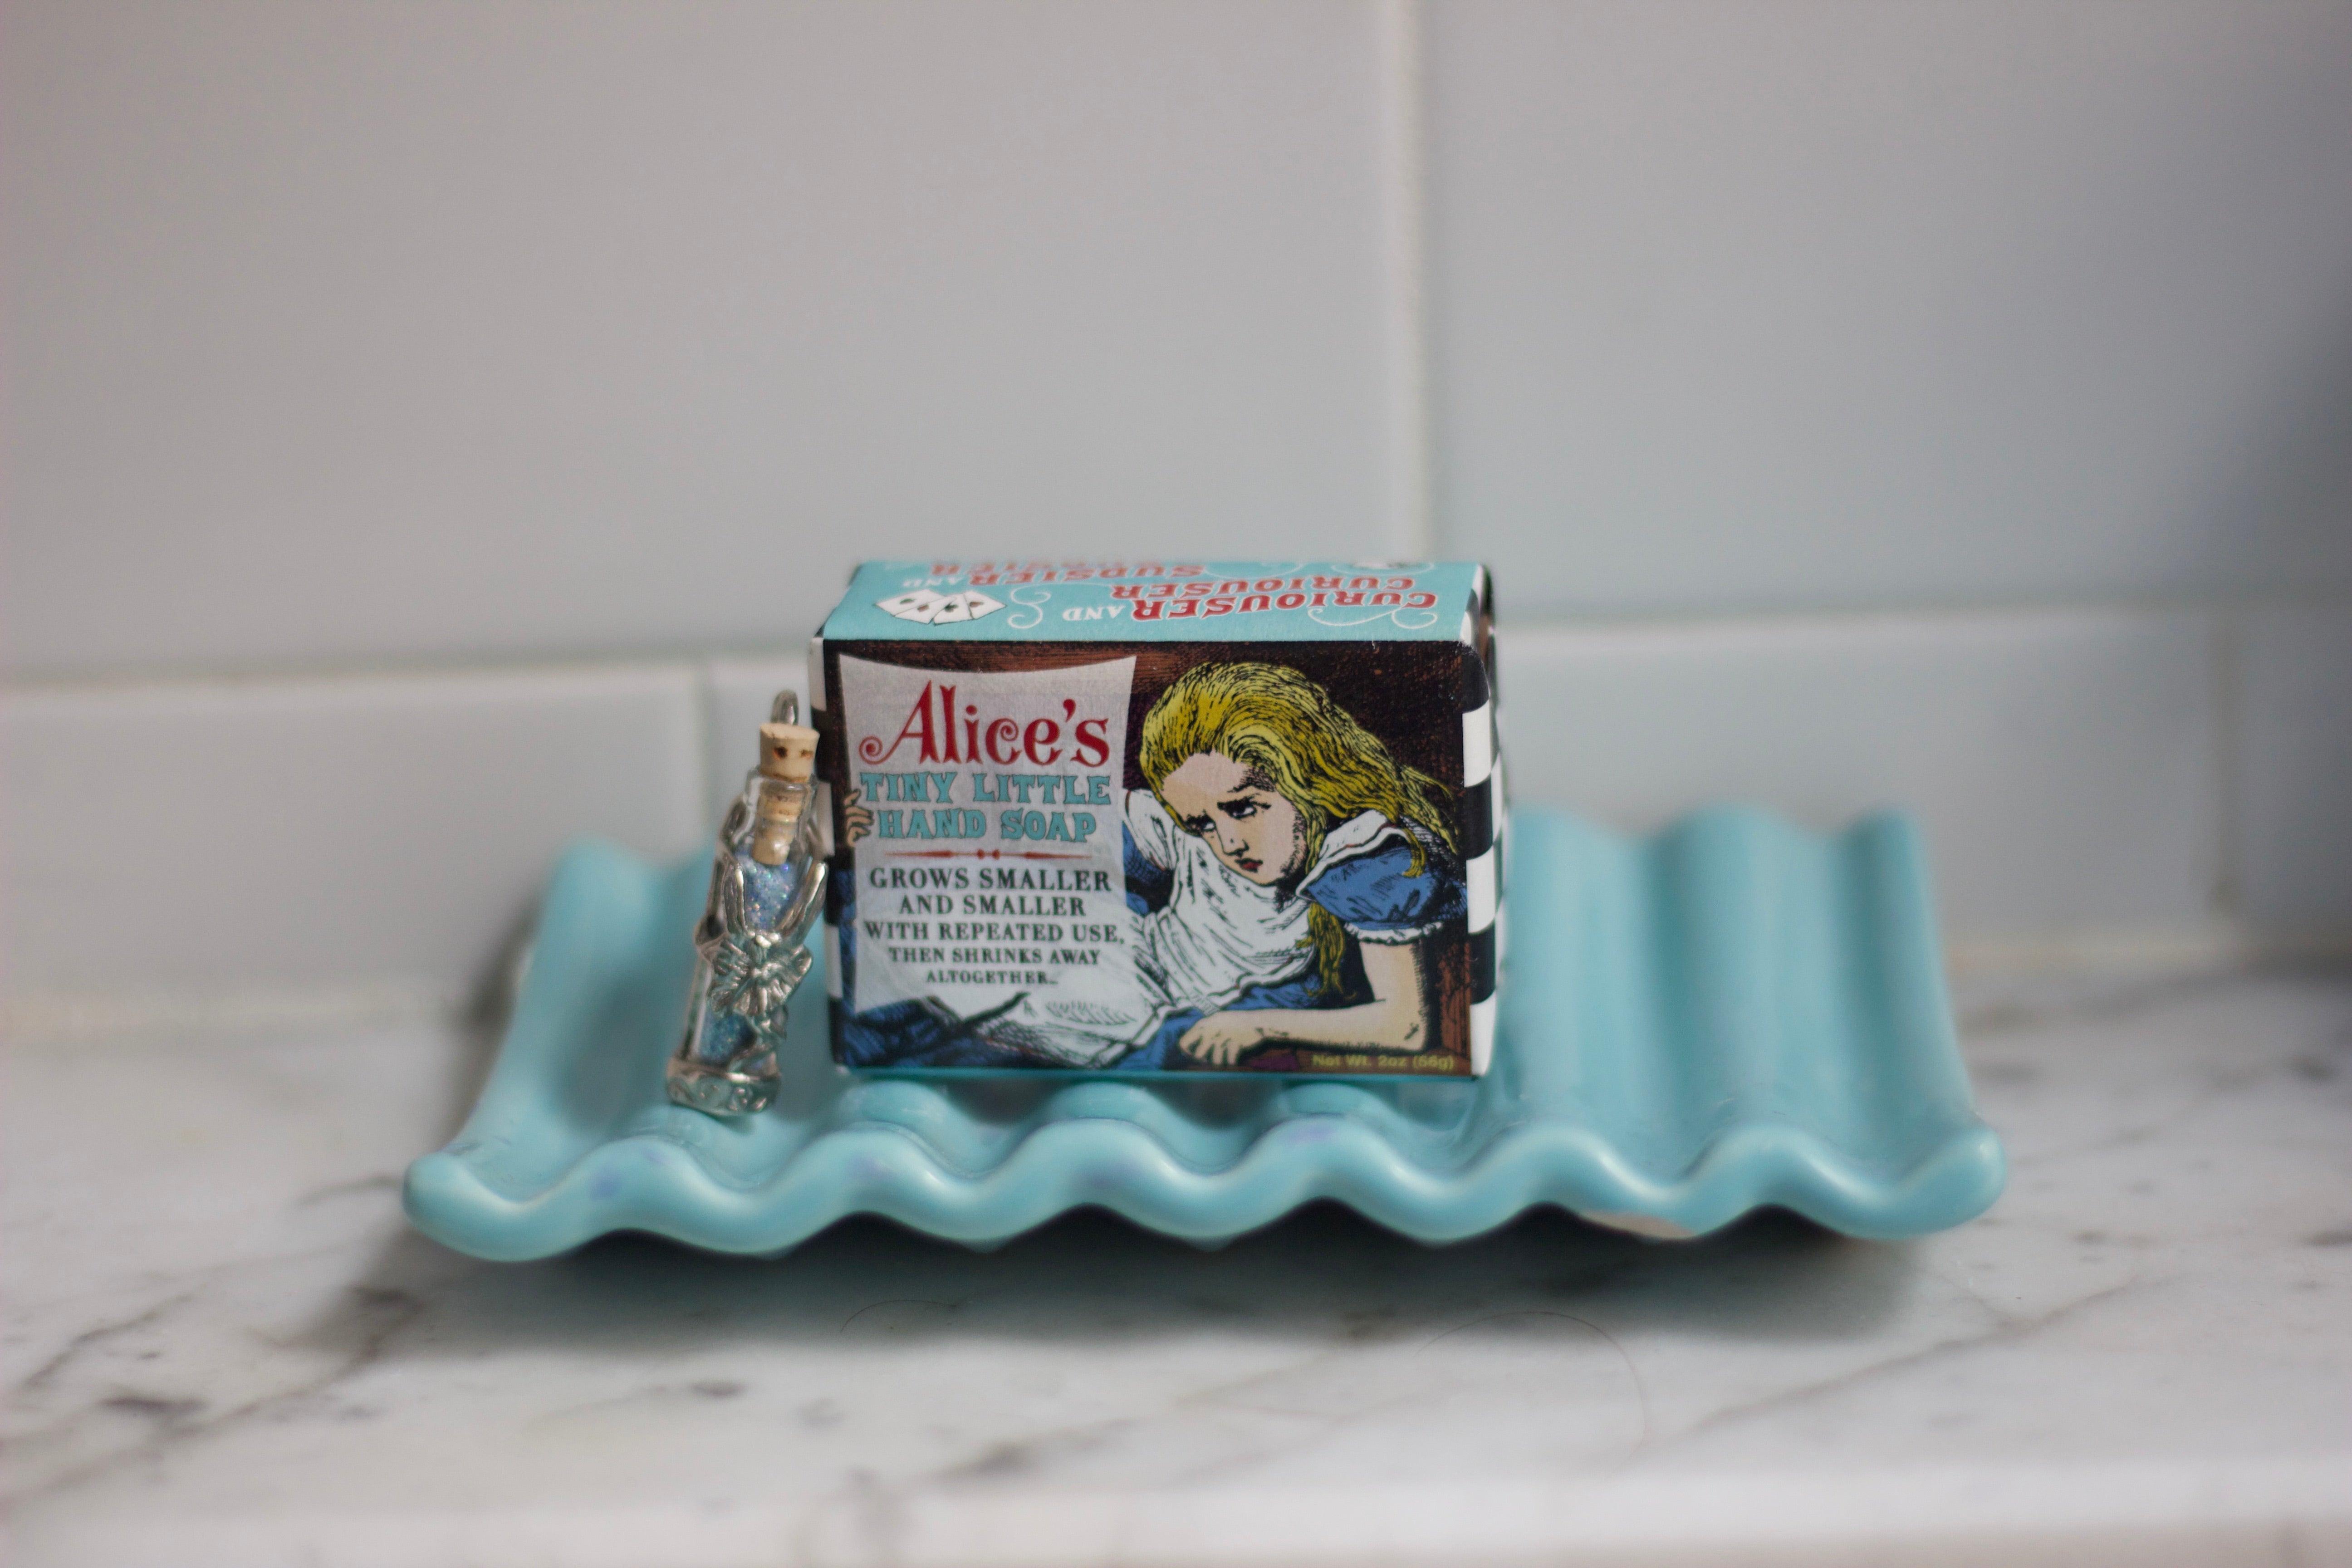 Product photo of Alice's Tiny Hand Soap, a novelty gift manufactured by The Unemployed Philosophers Guild.